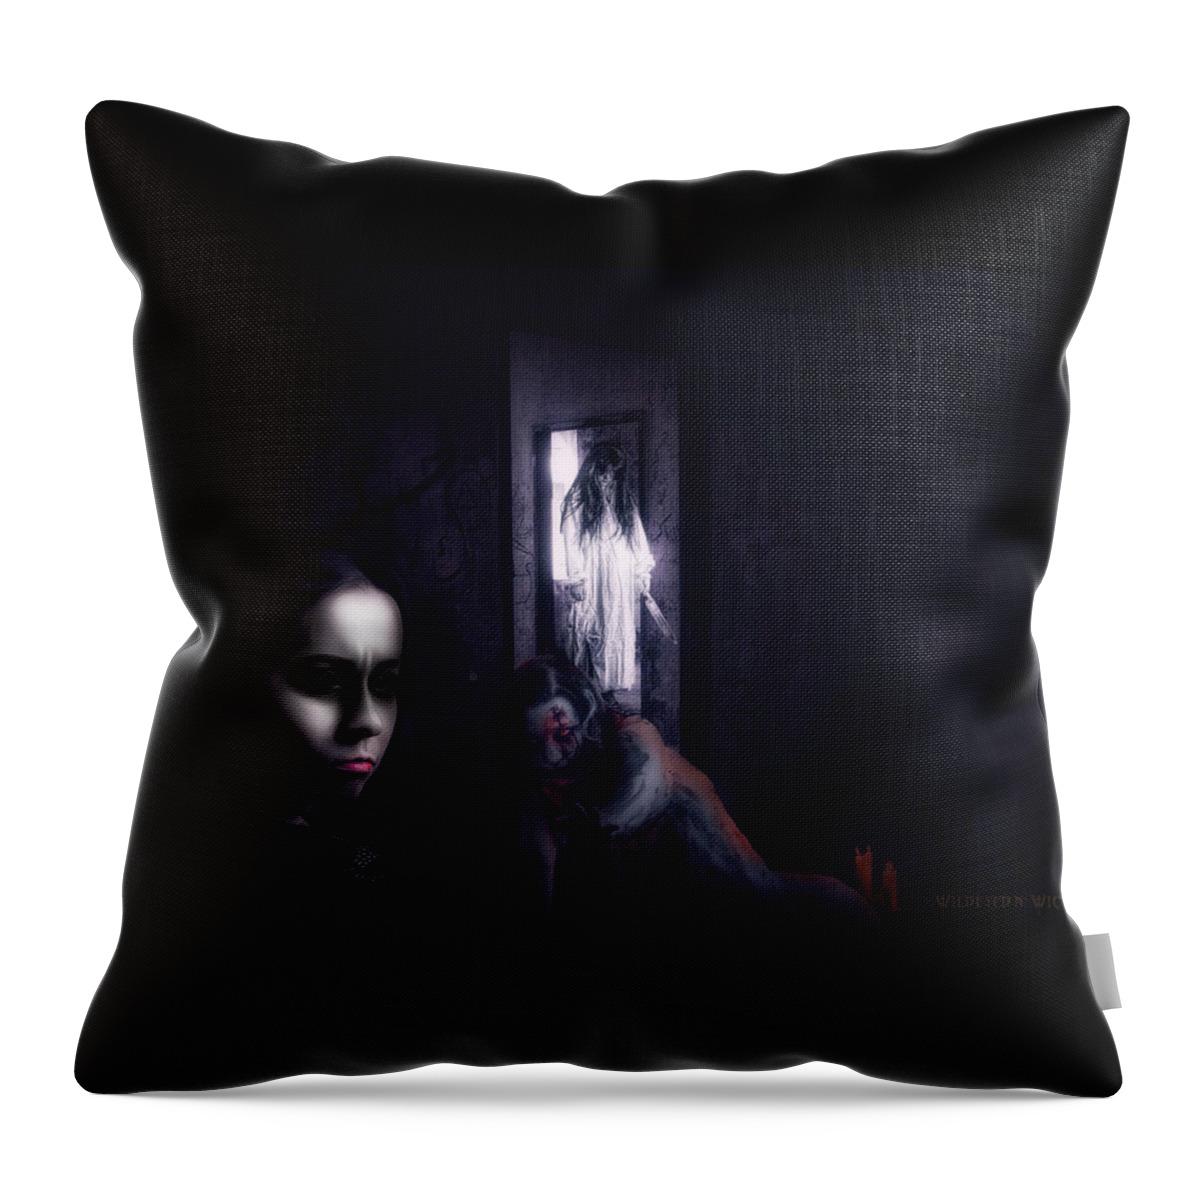 Dark Throw Pillow featuring the digital art Girls Just Want to have Fun by Brenda Wilcox aka Wildeyed n Wicked